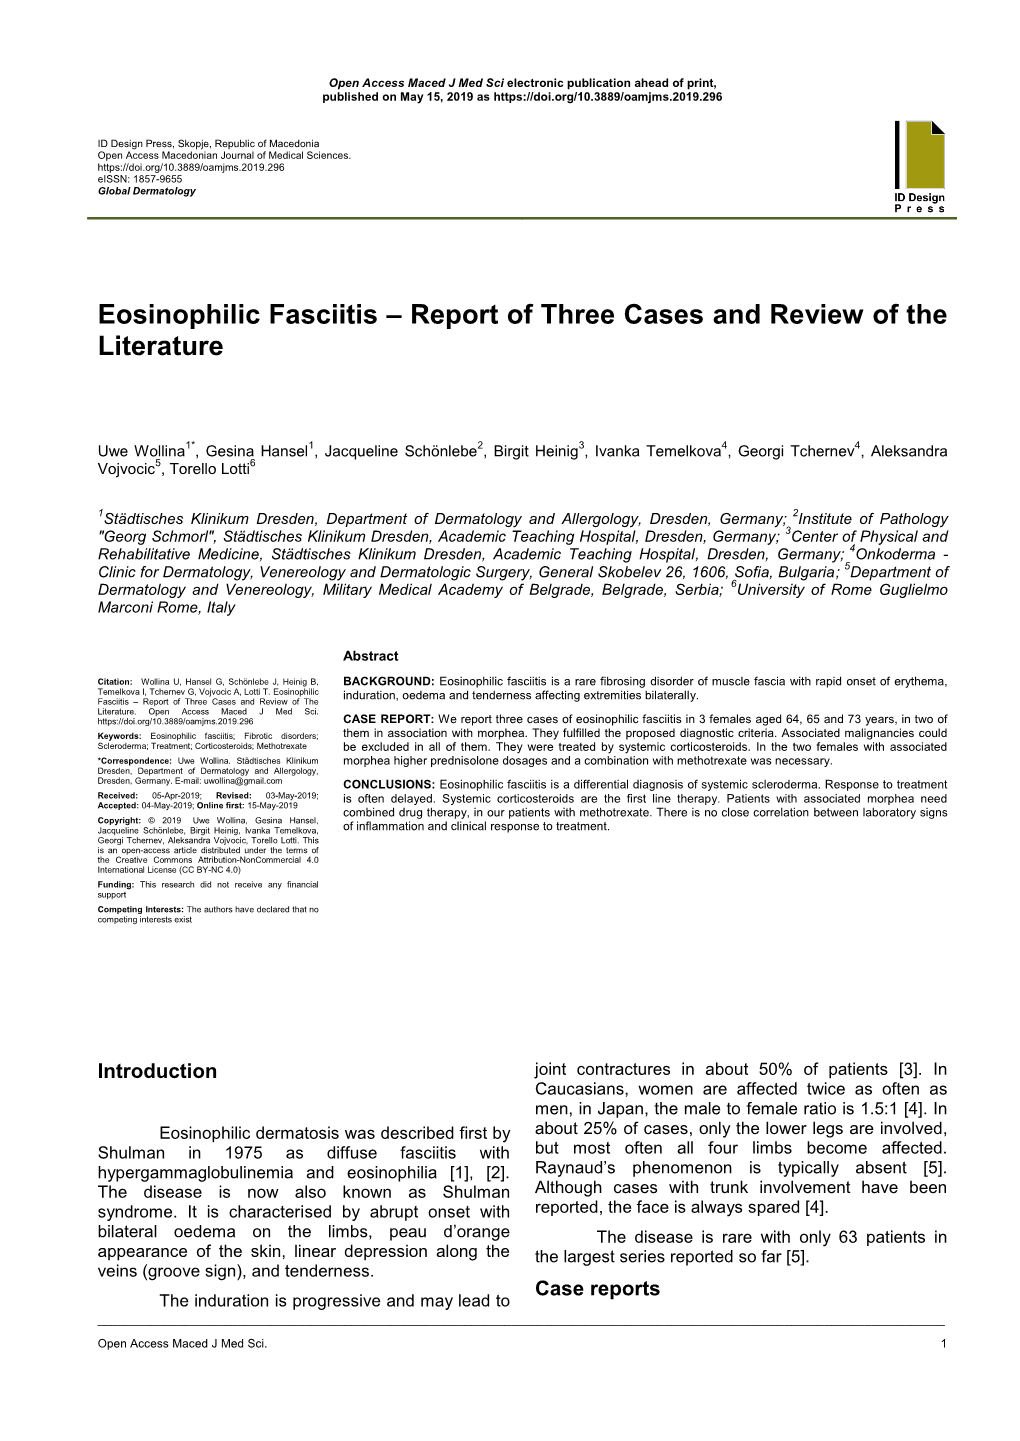 Eosinophilic Fasciitis – Report of Three Cases and Review of the Literature